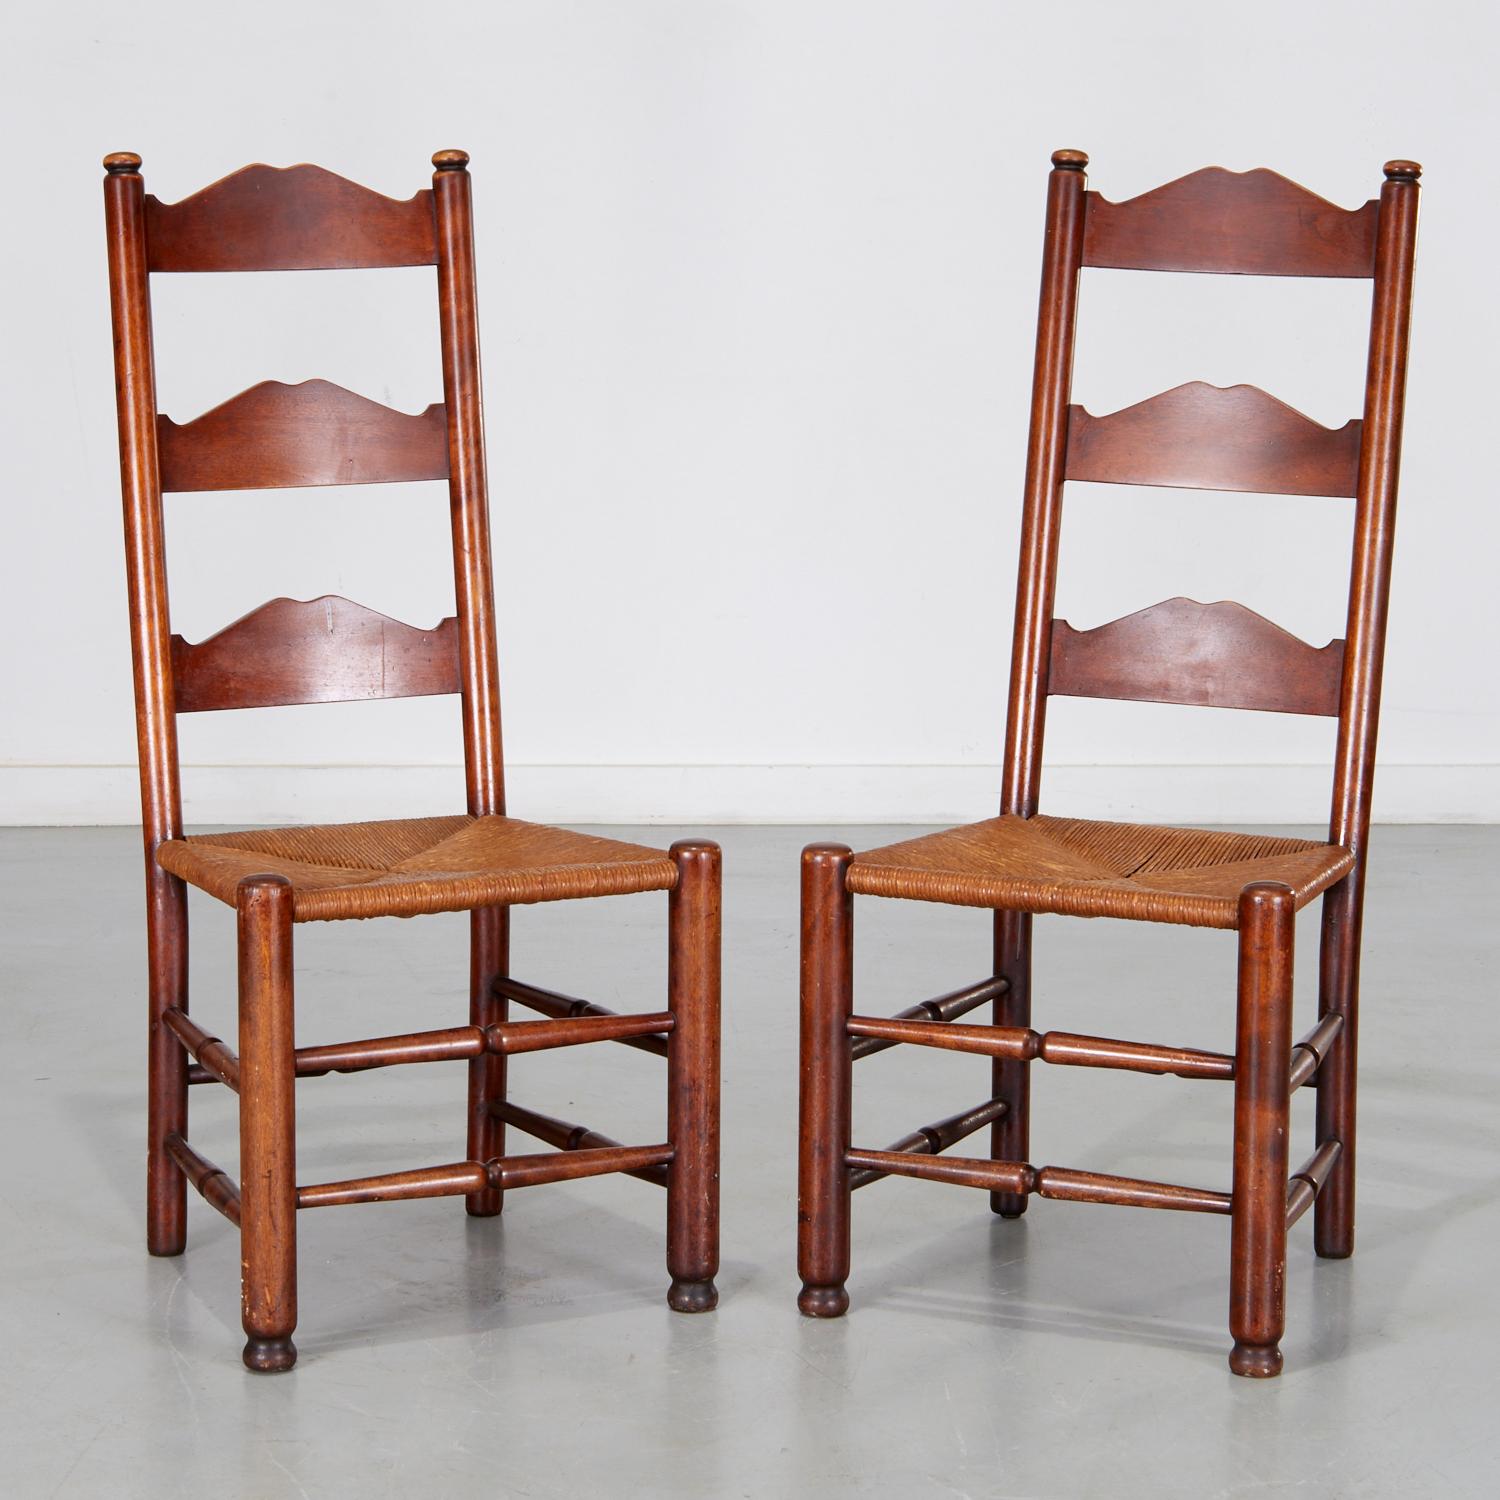 Antique Pair of French Provincial Ladder Back Chairs with Rush Seats For Sale 1